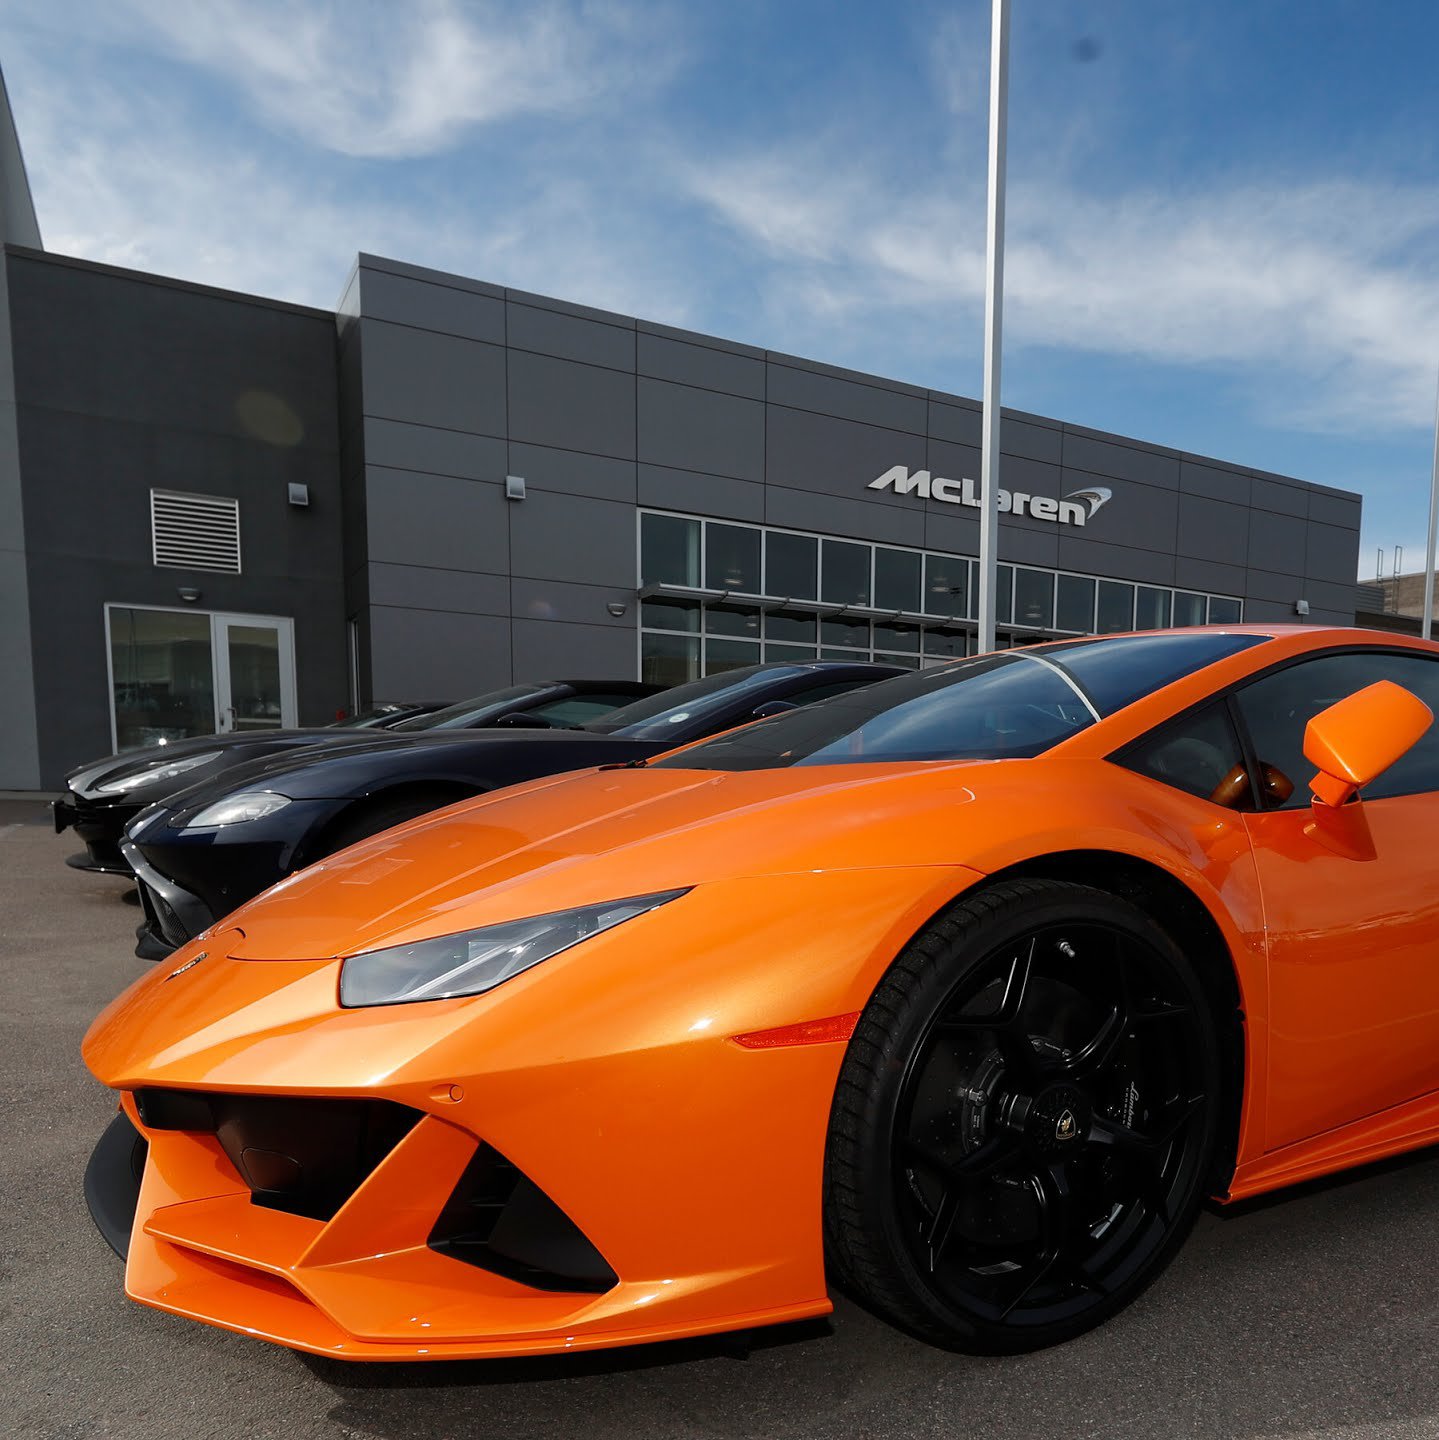 Man arrested for using Covid-19 loans to buy Lamborghini